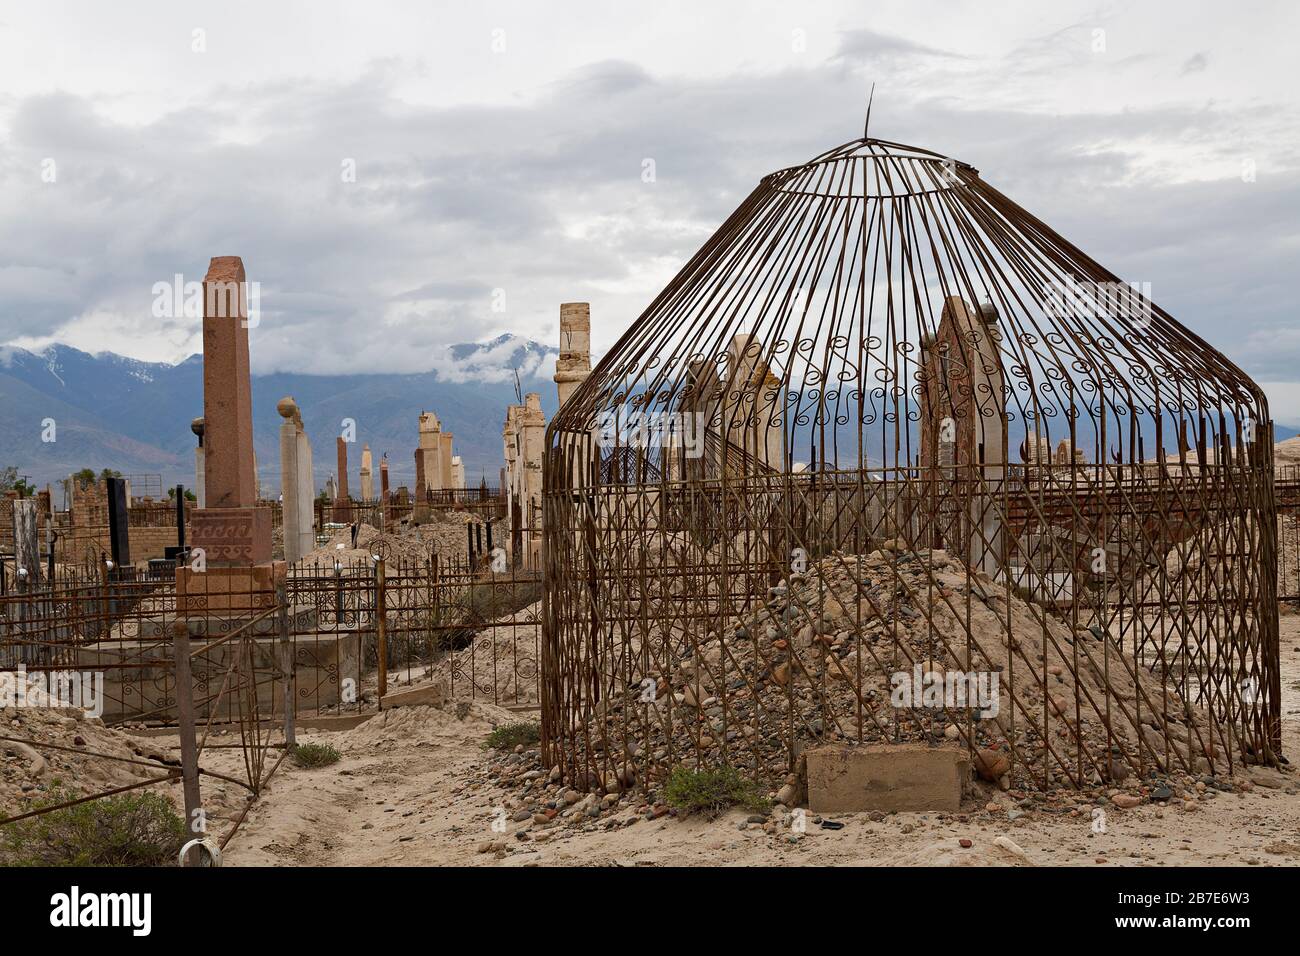 Central asian muslim cemetery near the Issyk Kul Lake, in Kyrgyzstan Stock Photo